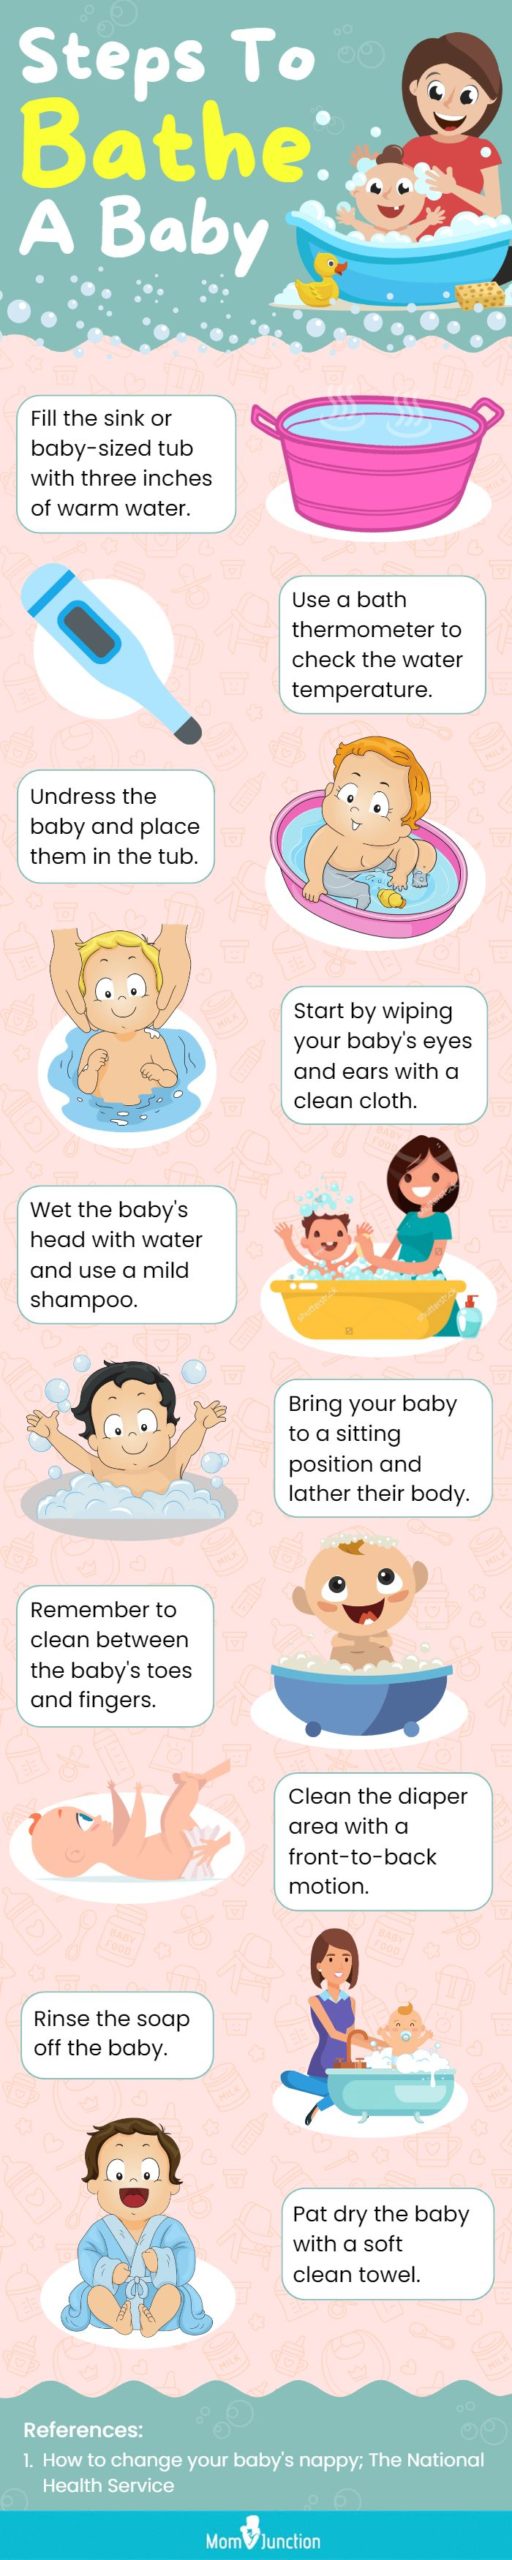 Steps To Bathe A Baby (Infographic)